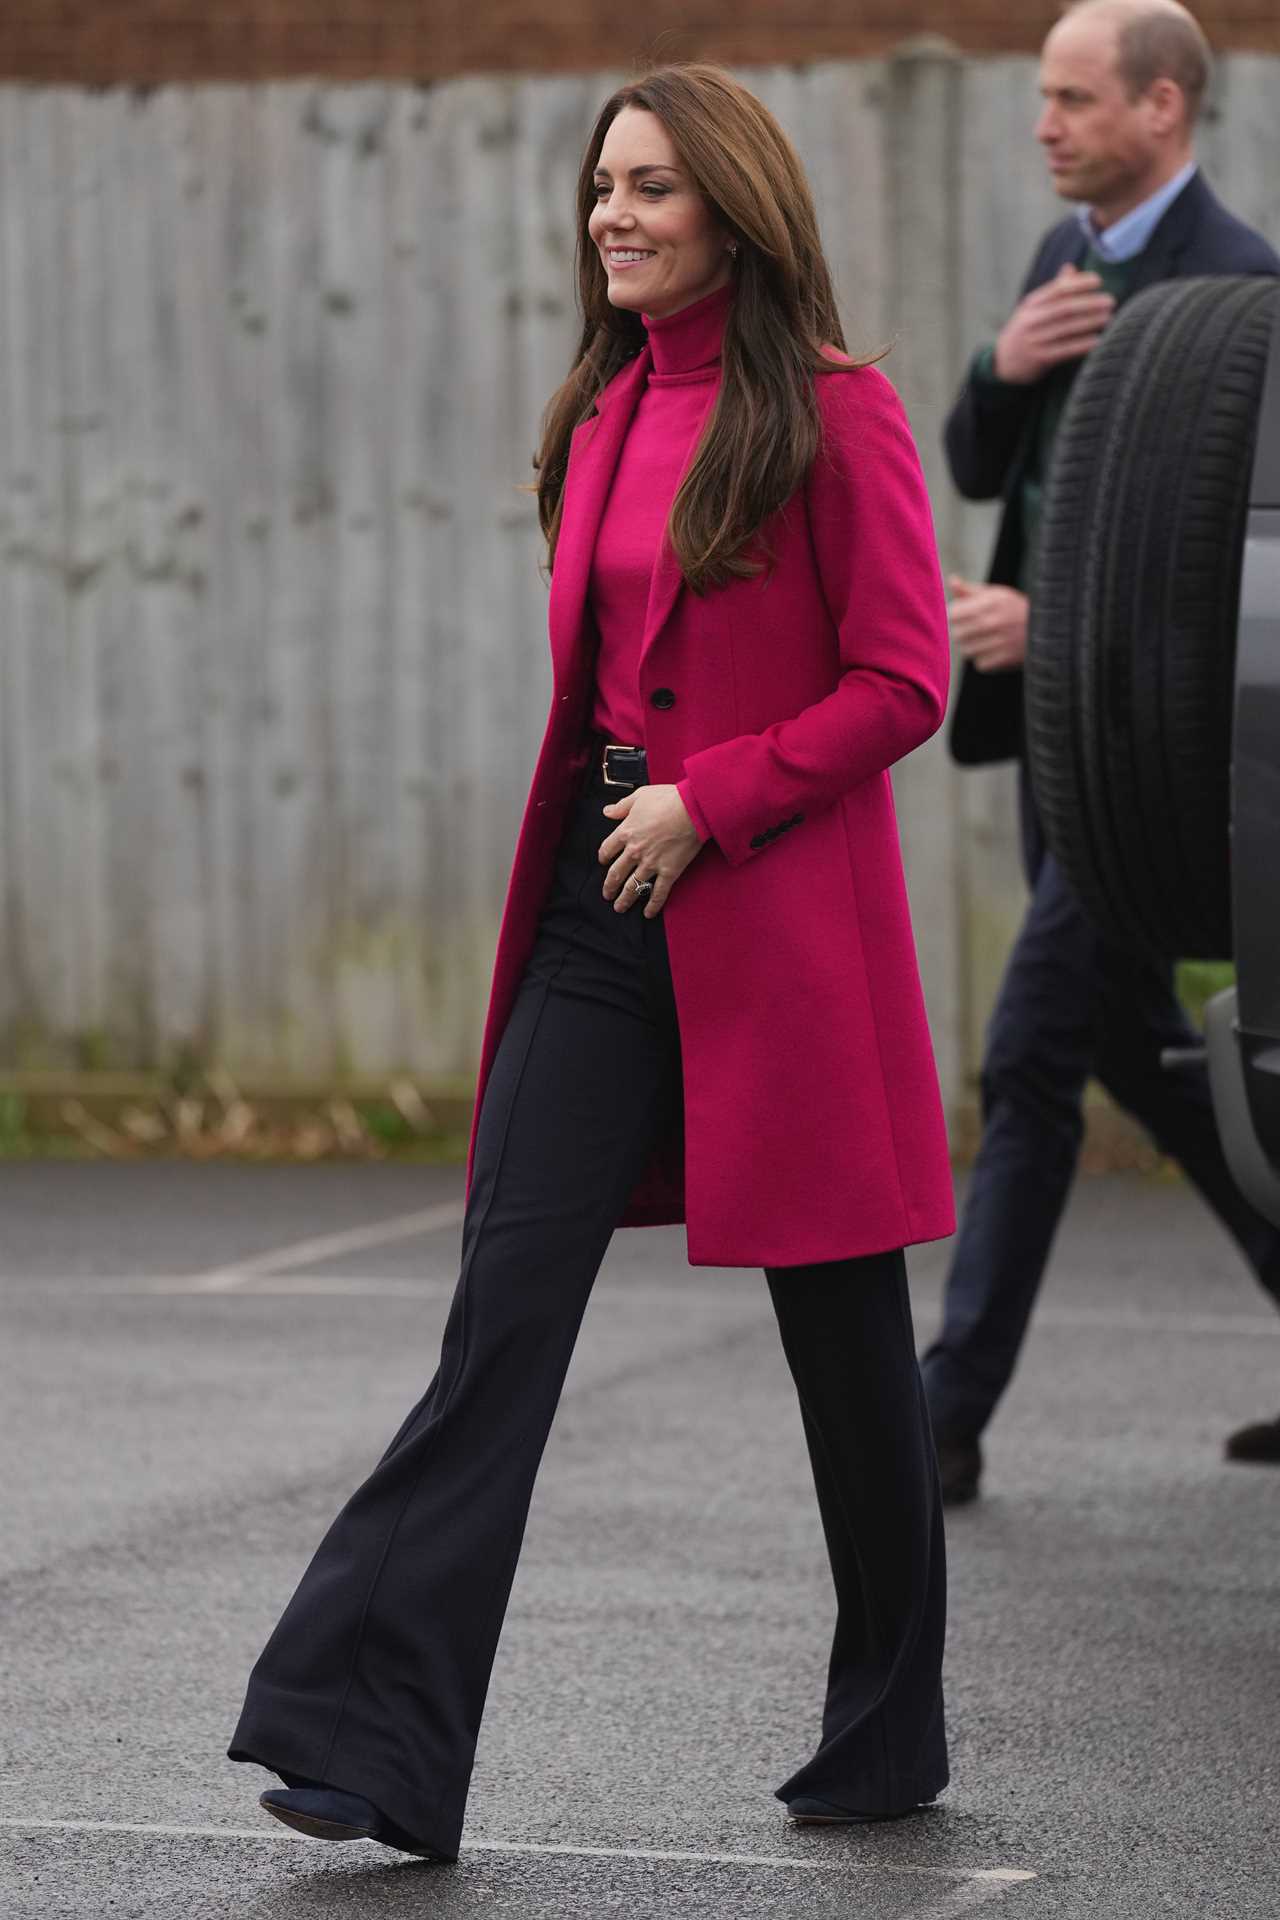 Princess Kate stuns in bright pink outfit – and royal fans think it’s a dig at Meghan Markle